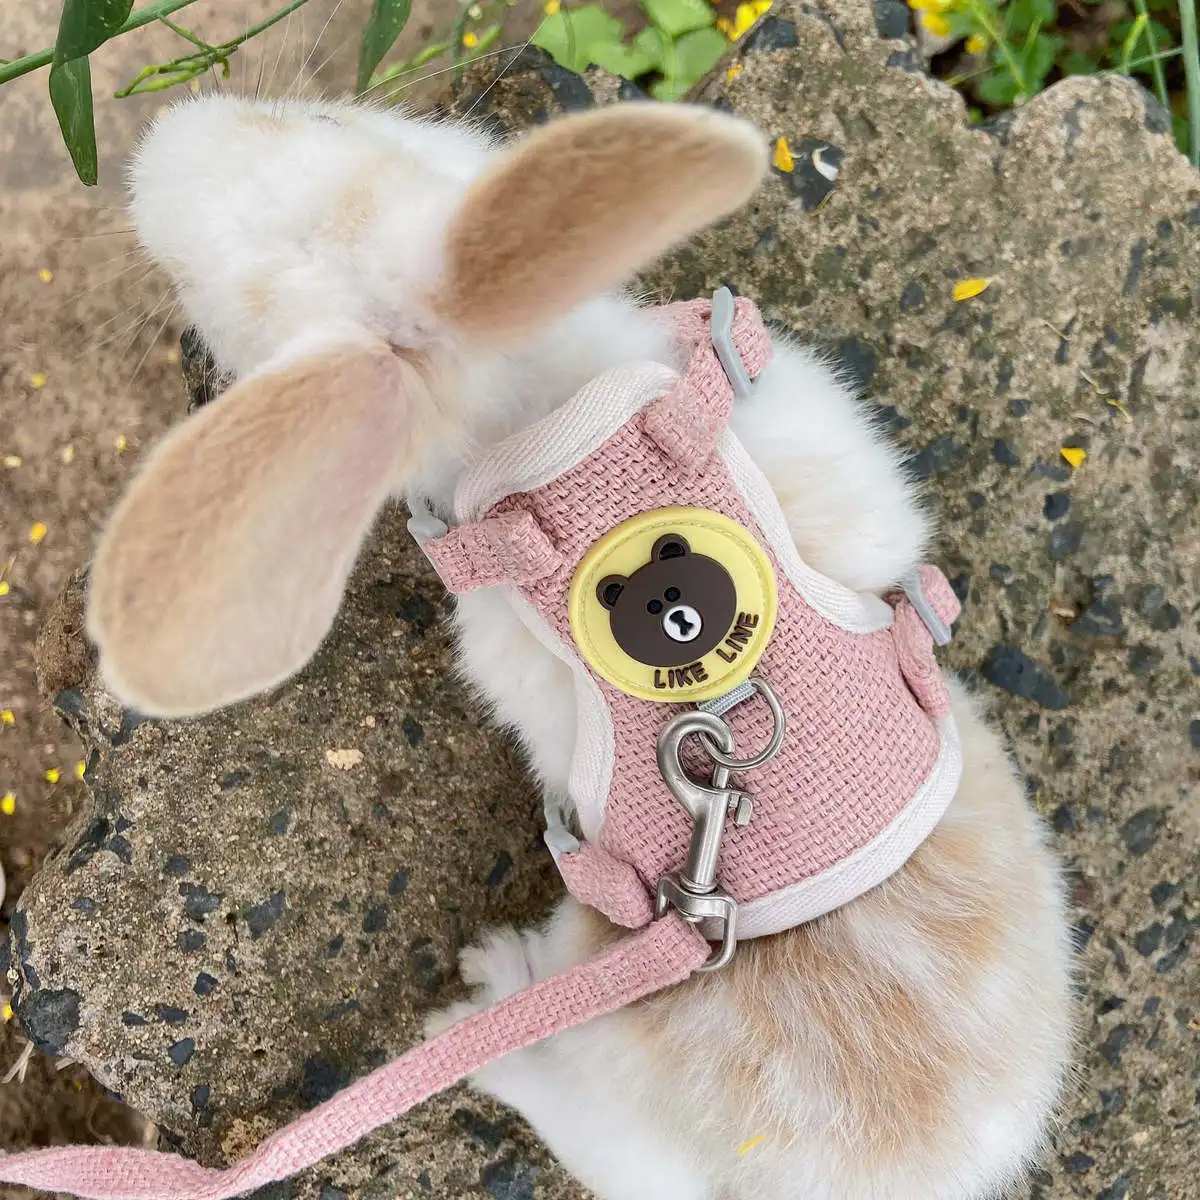 

Pet Mesh Soft Harness With Leash Small Animal Vest Lead For Hamster Rabbit Bunny Small Animal Pet Accessories Belt Lead Set